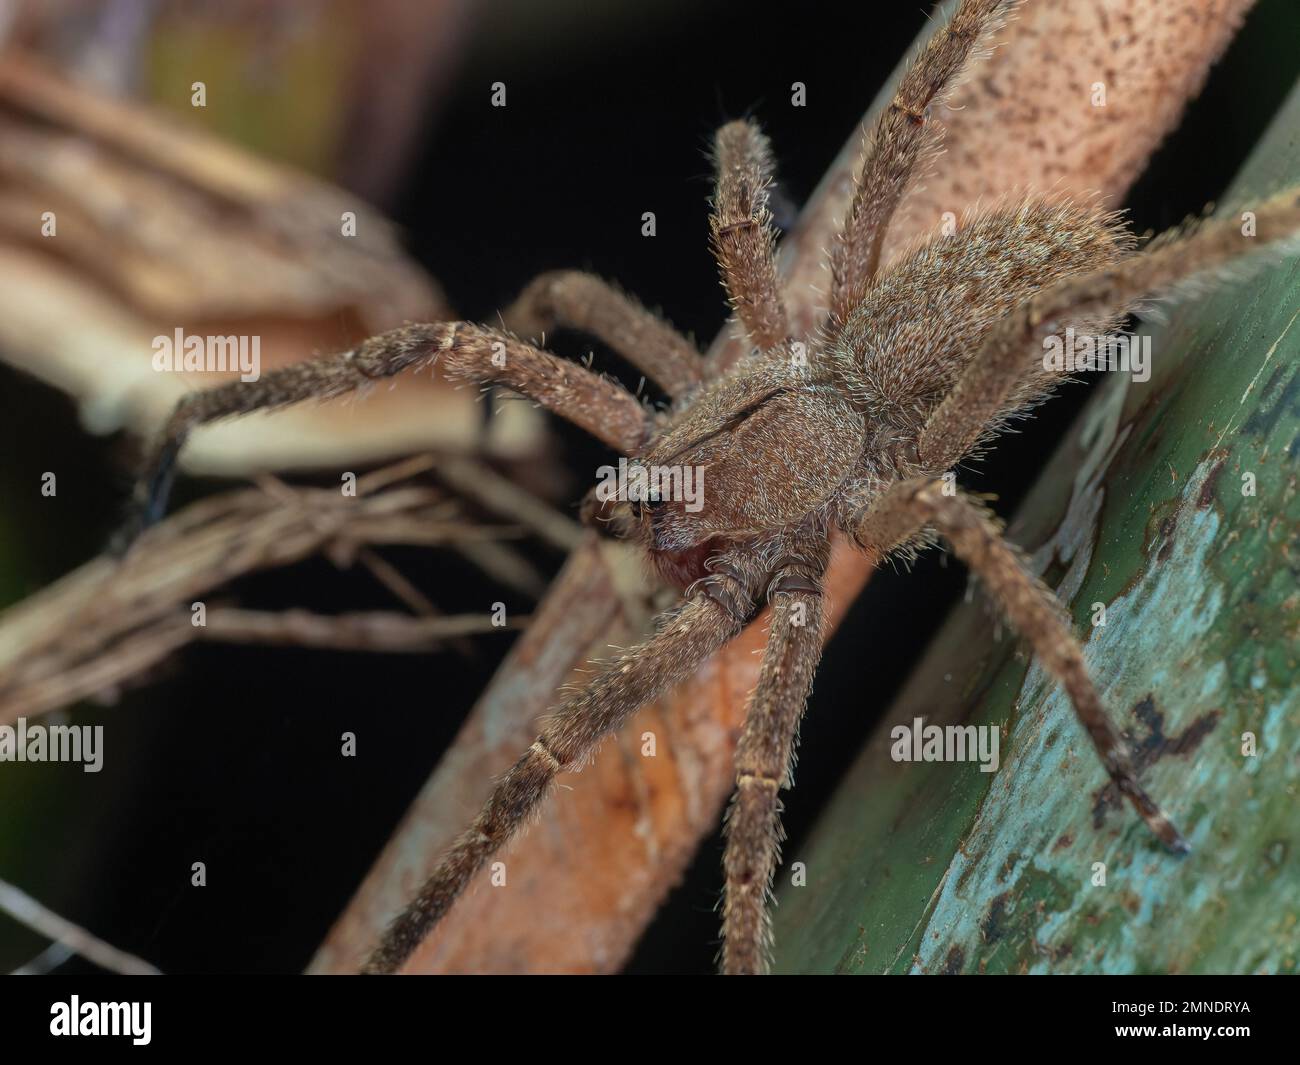 Detailed macrophotography of a brazilian wandering spider (Phoneutria, aranha armadeira), also known as banana spider, in natural habitat. Stock Photo